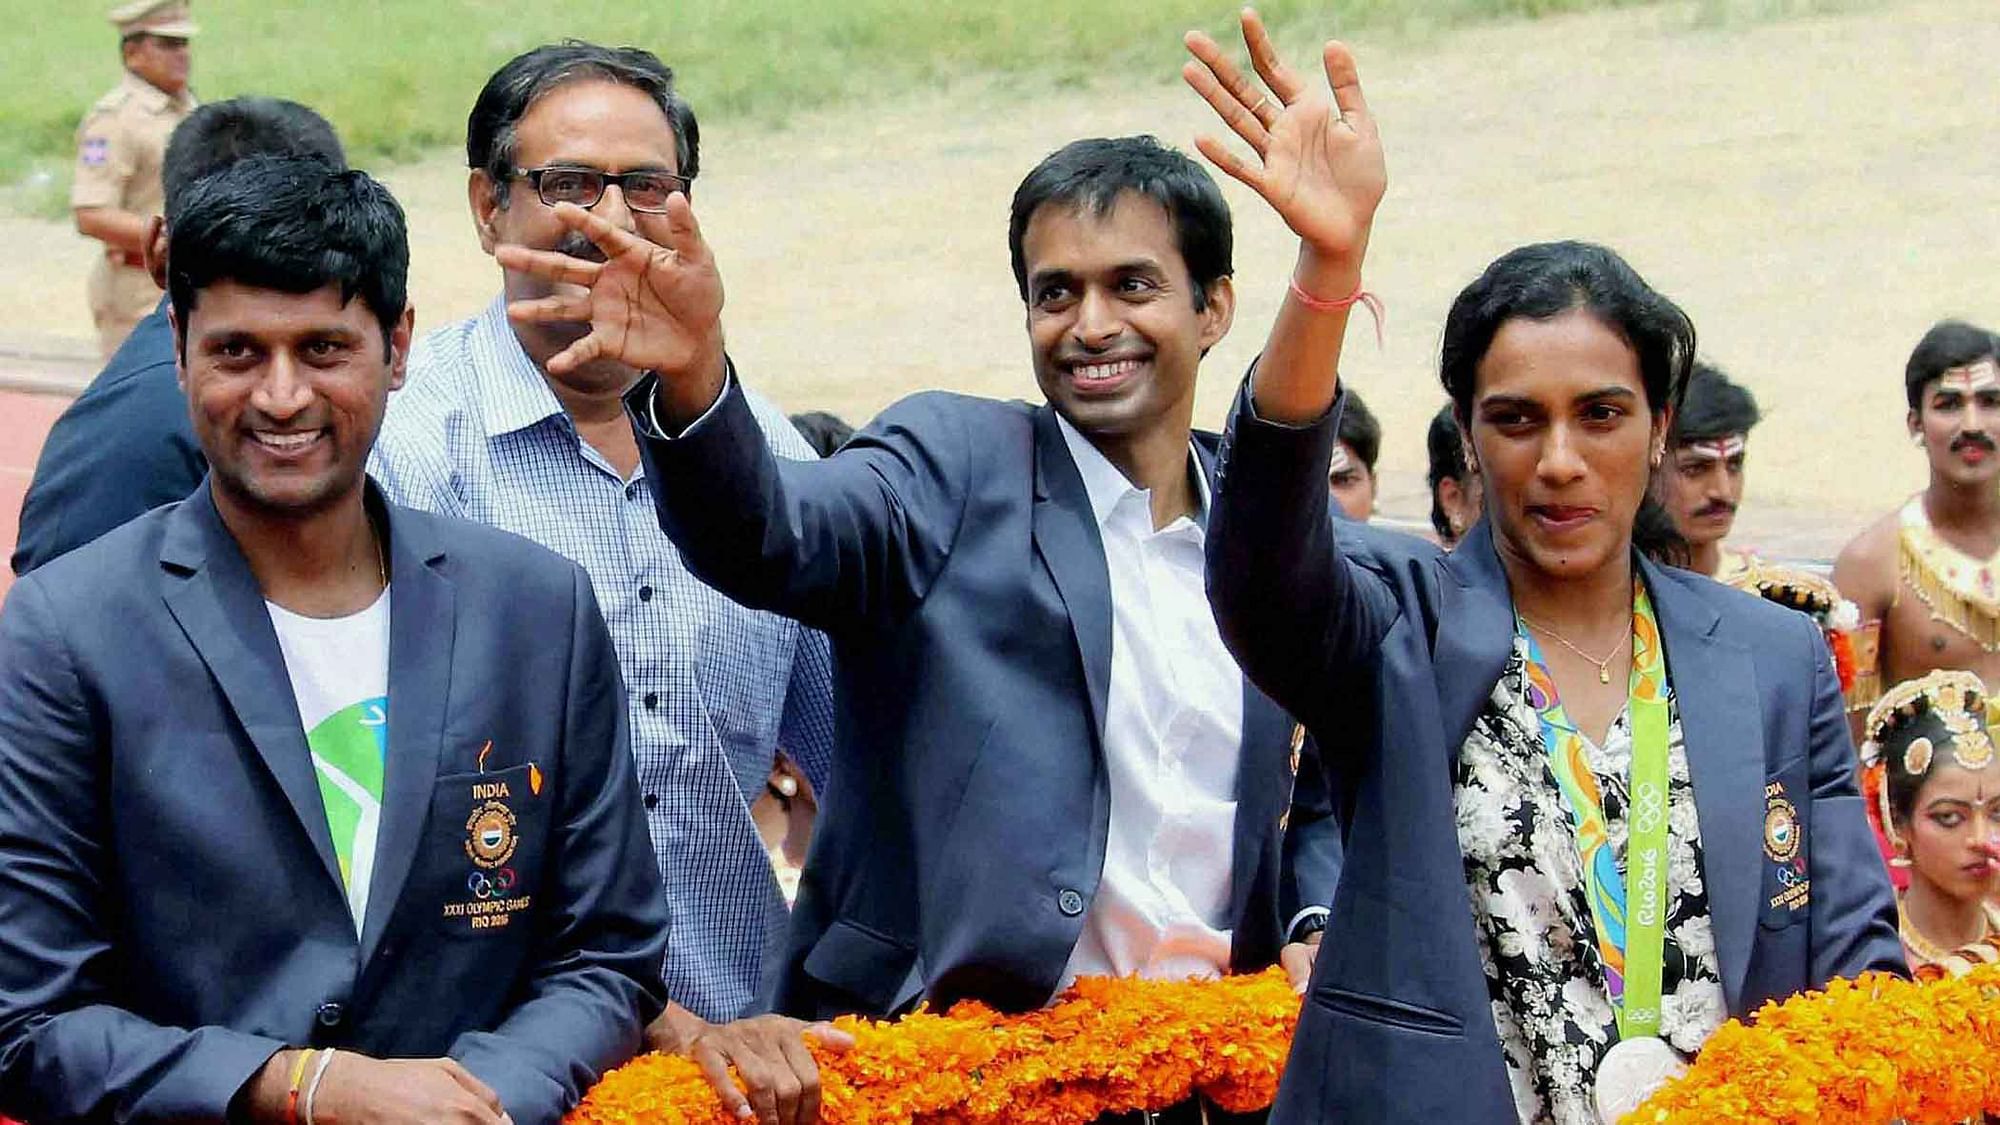 P V Sindhu and P Gopichand receive a rousing welcome after returning to Hyderabad. (Photo Courtesy: PTI)